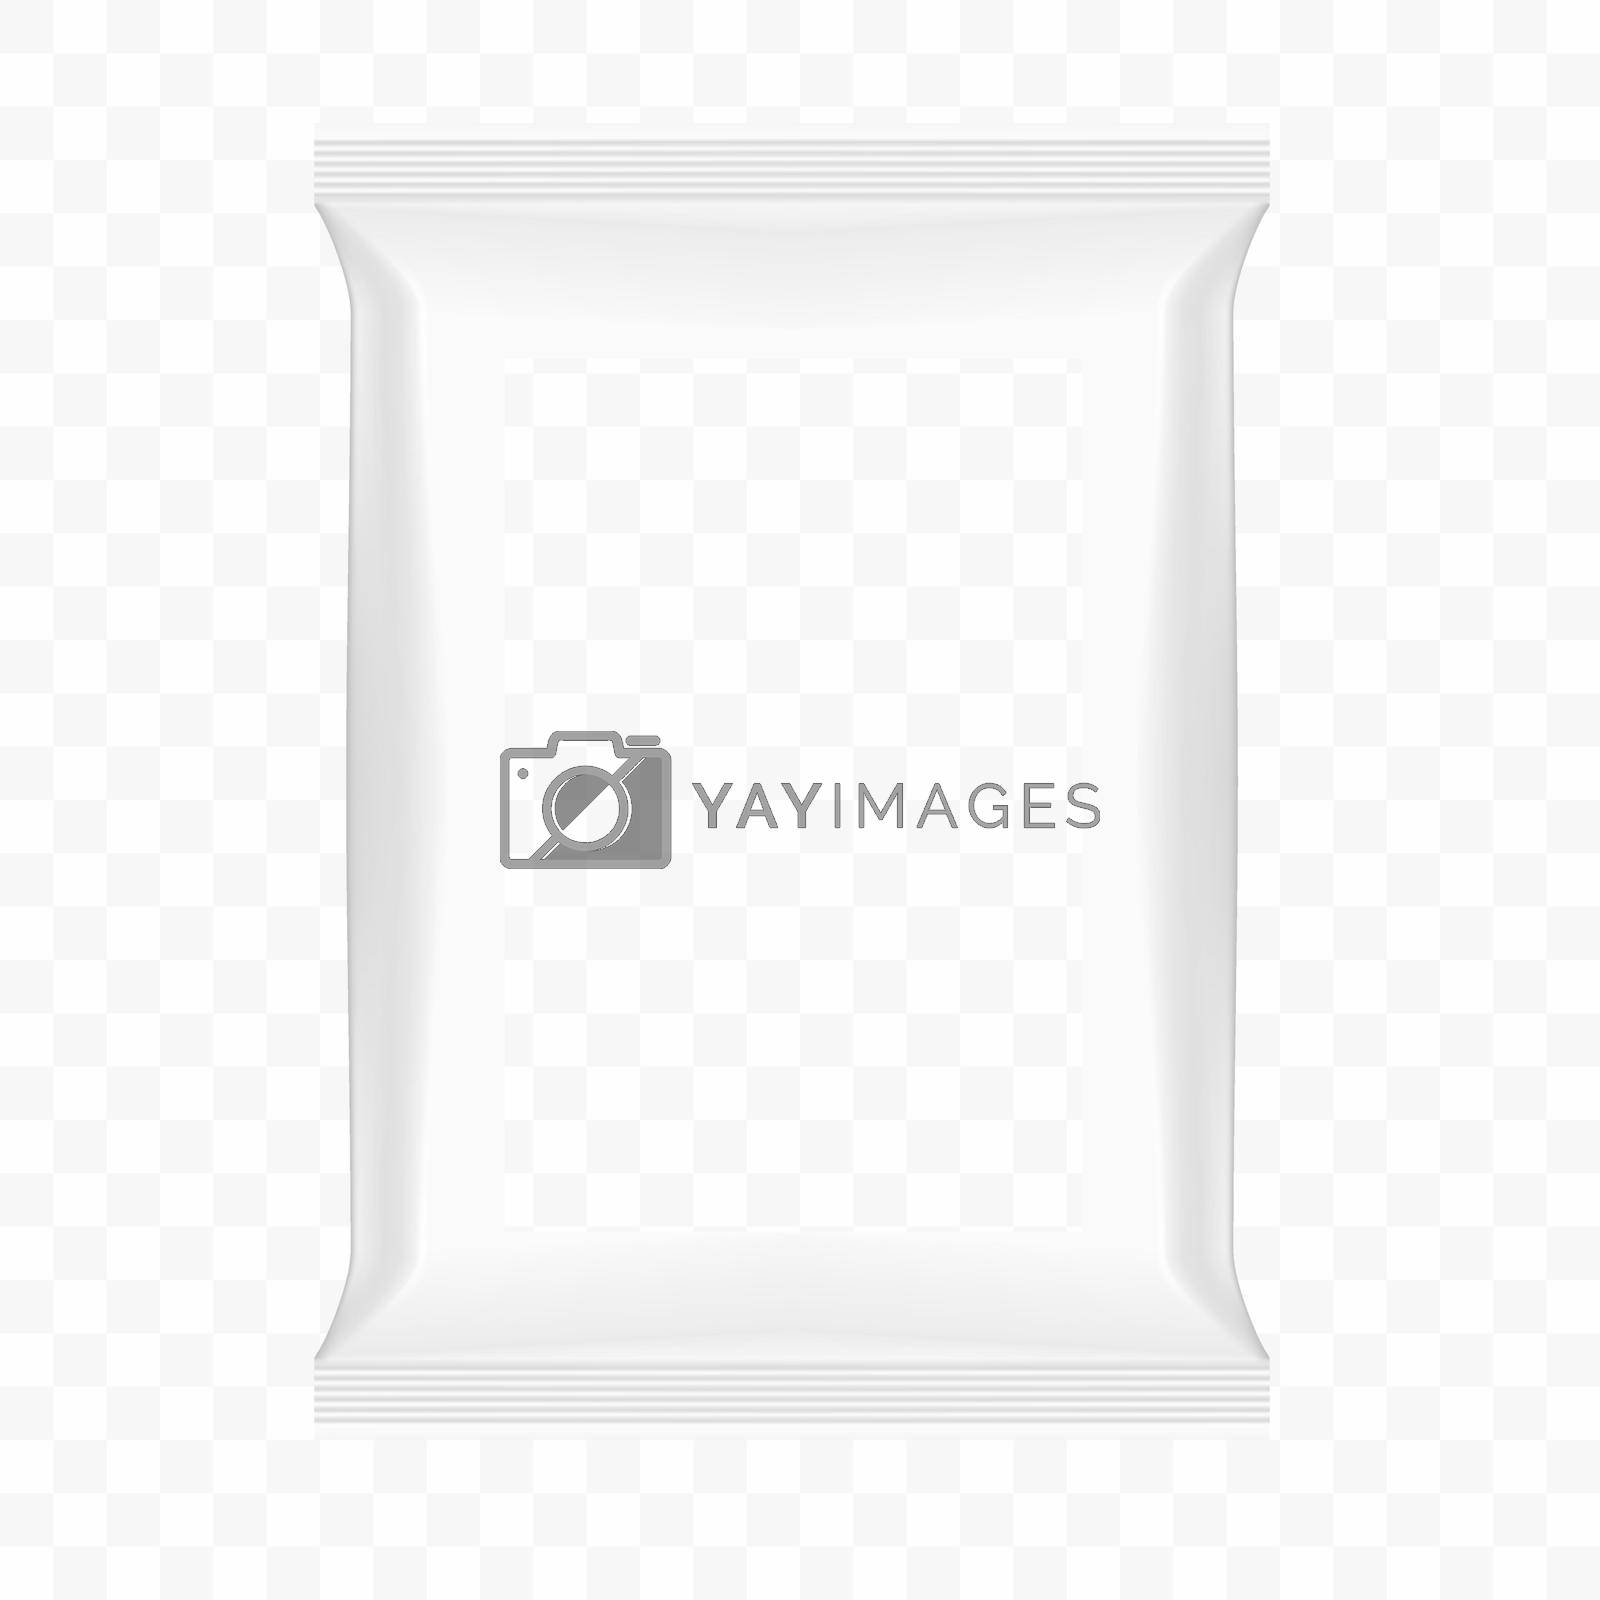 Royalty free image of Bag For Food Or Snack With Transparent Window Template by VectorThings